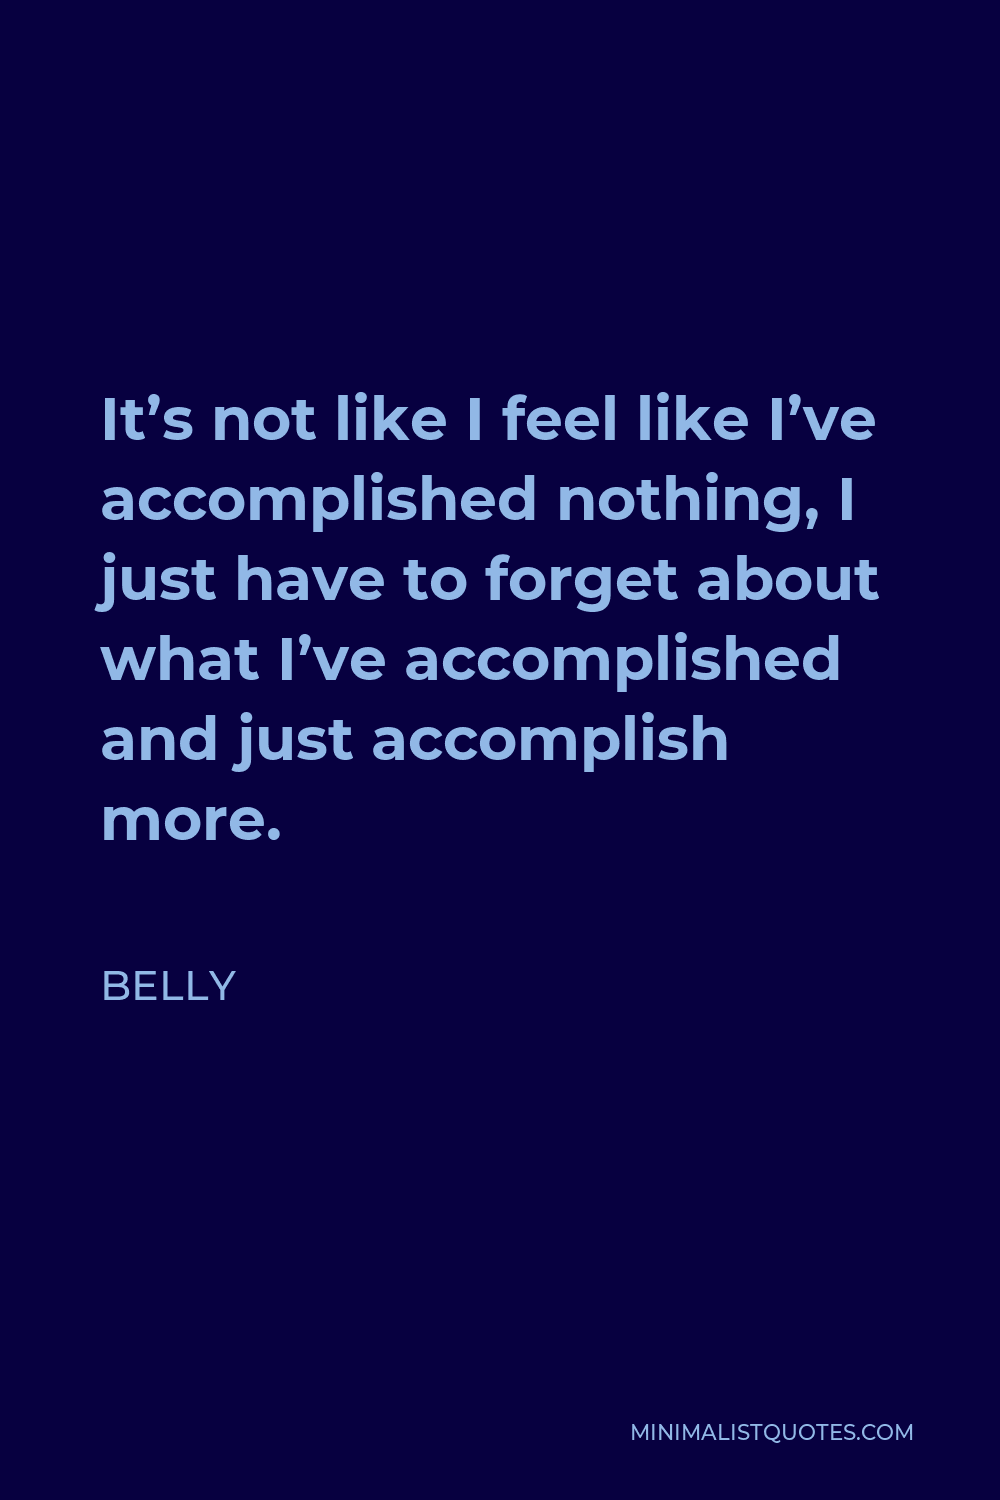 Belly Quote - It’s not like I feel like I’ve accomplished nothing, I just have to forget about what I’ve accomplished and just accomplish more.